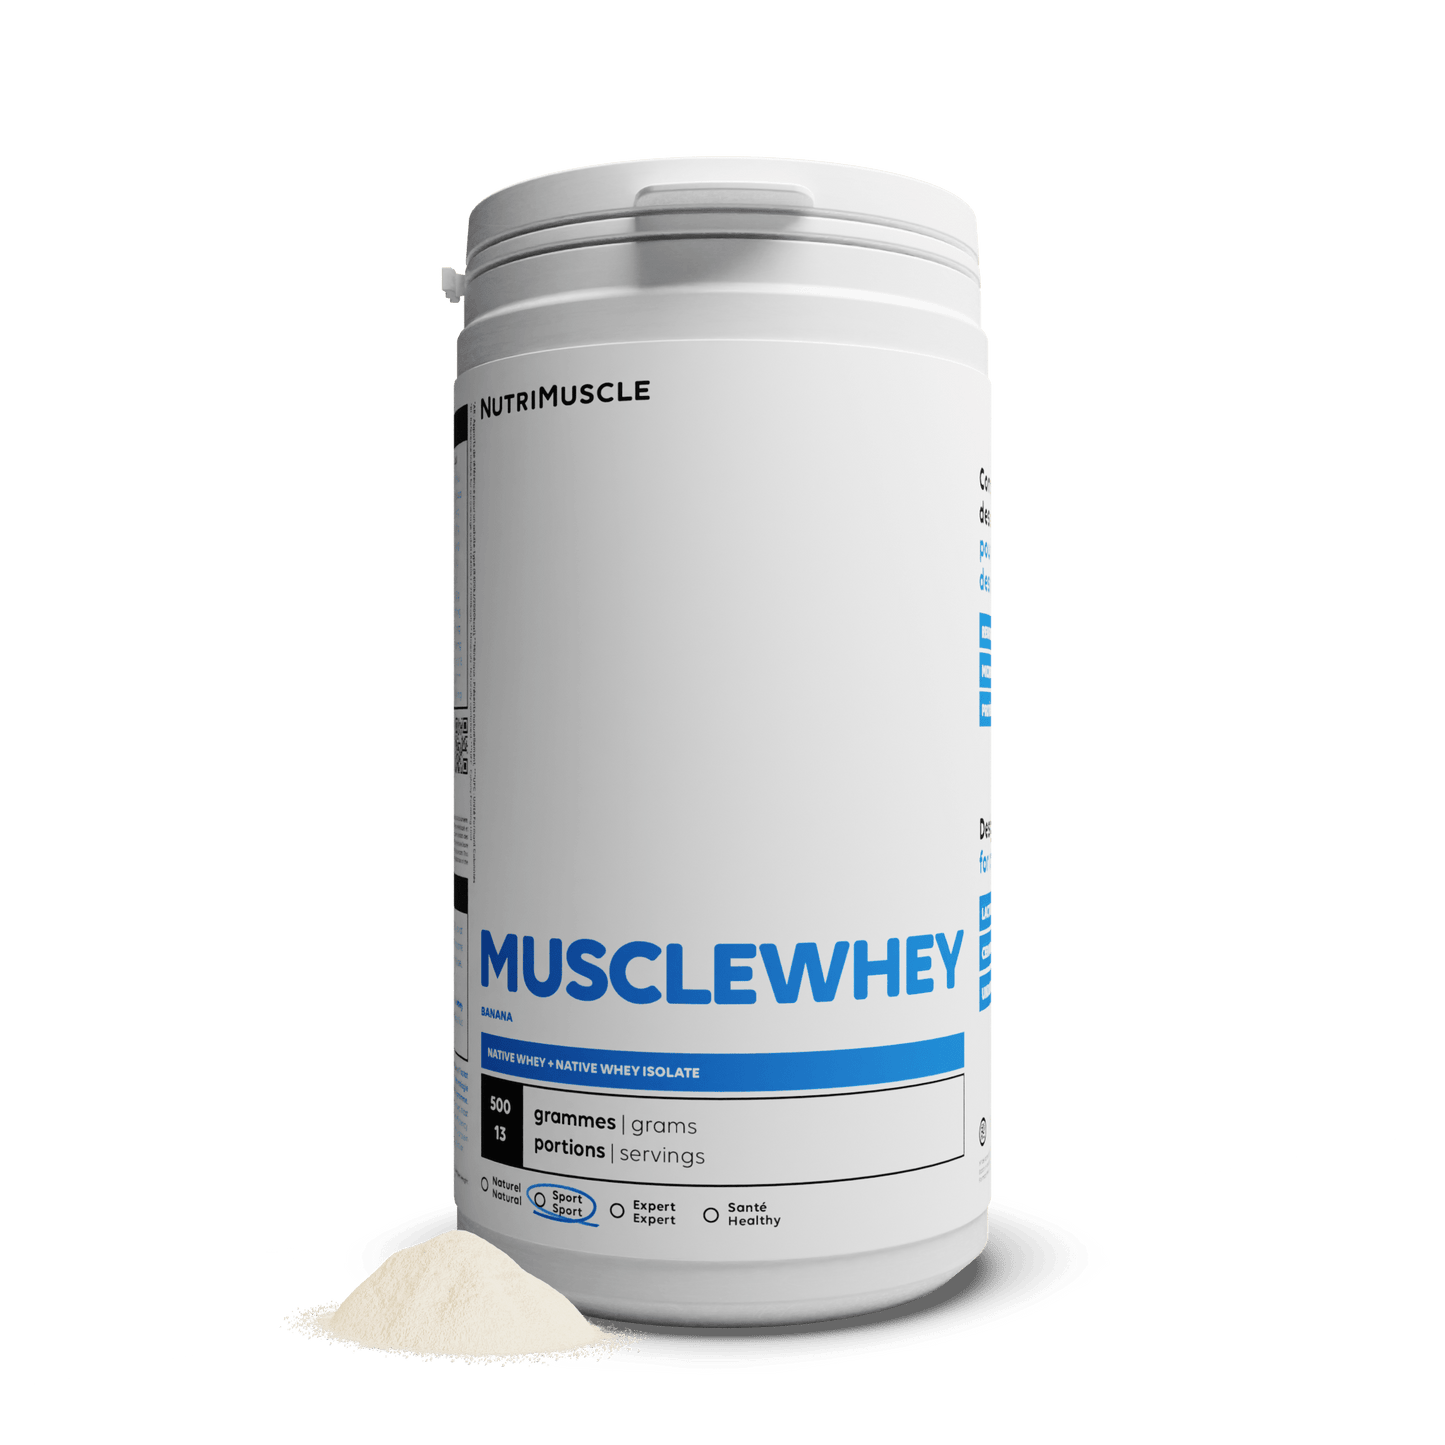 Nutrimuscle Protéines Banane / 500 g Musclewhey - Mix Protein